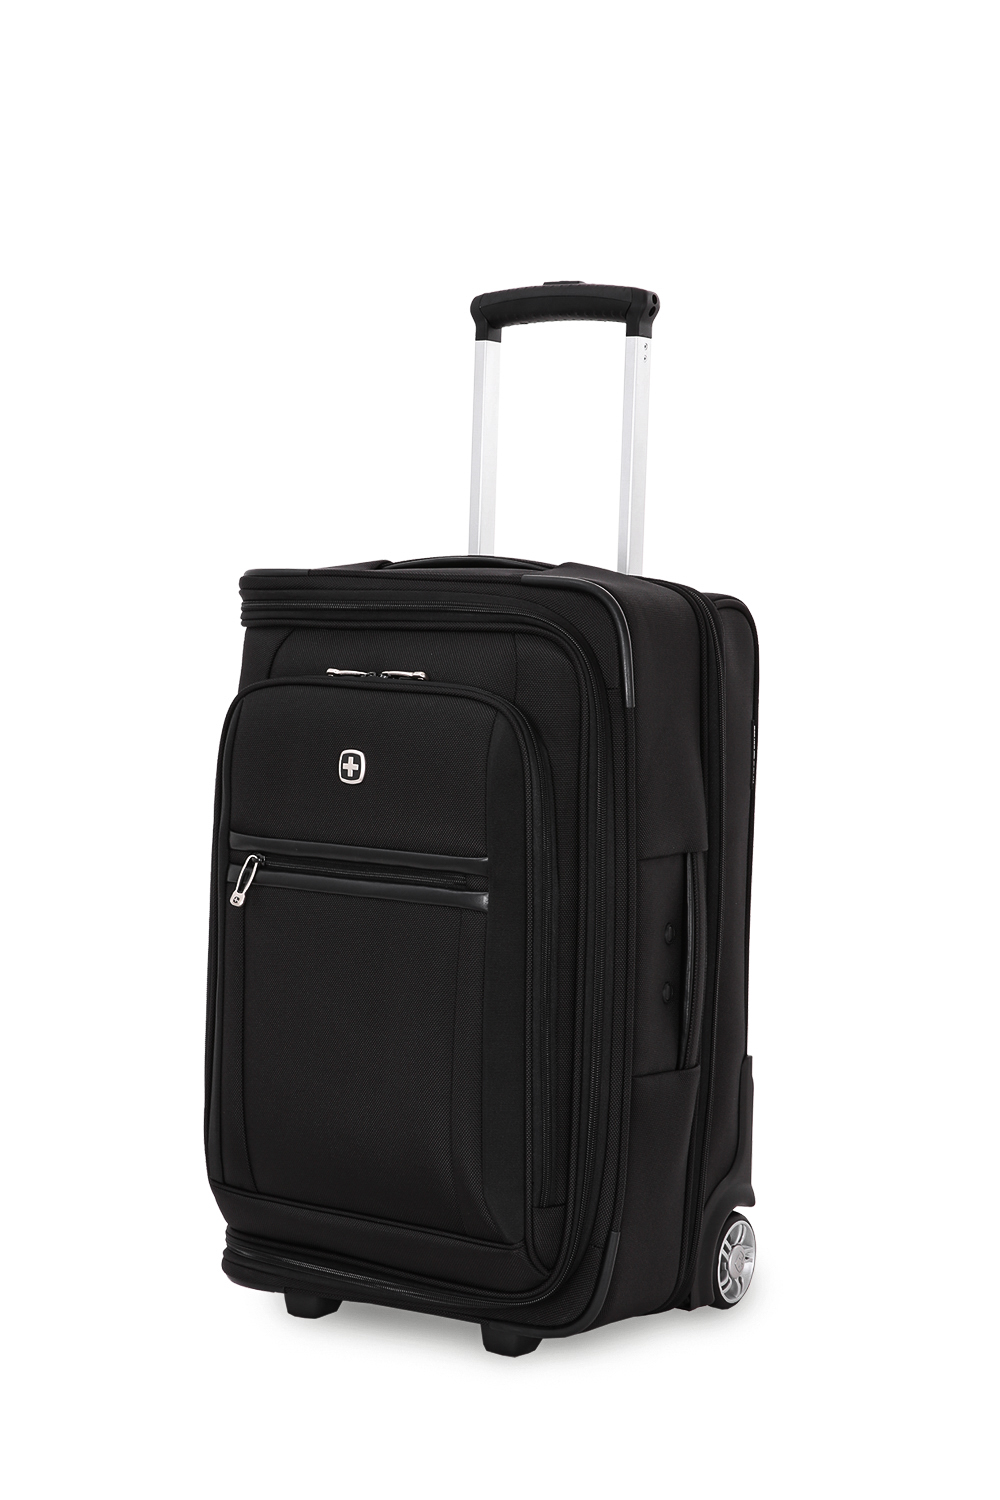 Swissgear 6305 28 Expandable Spinner Luggage